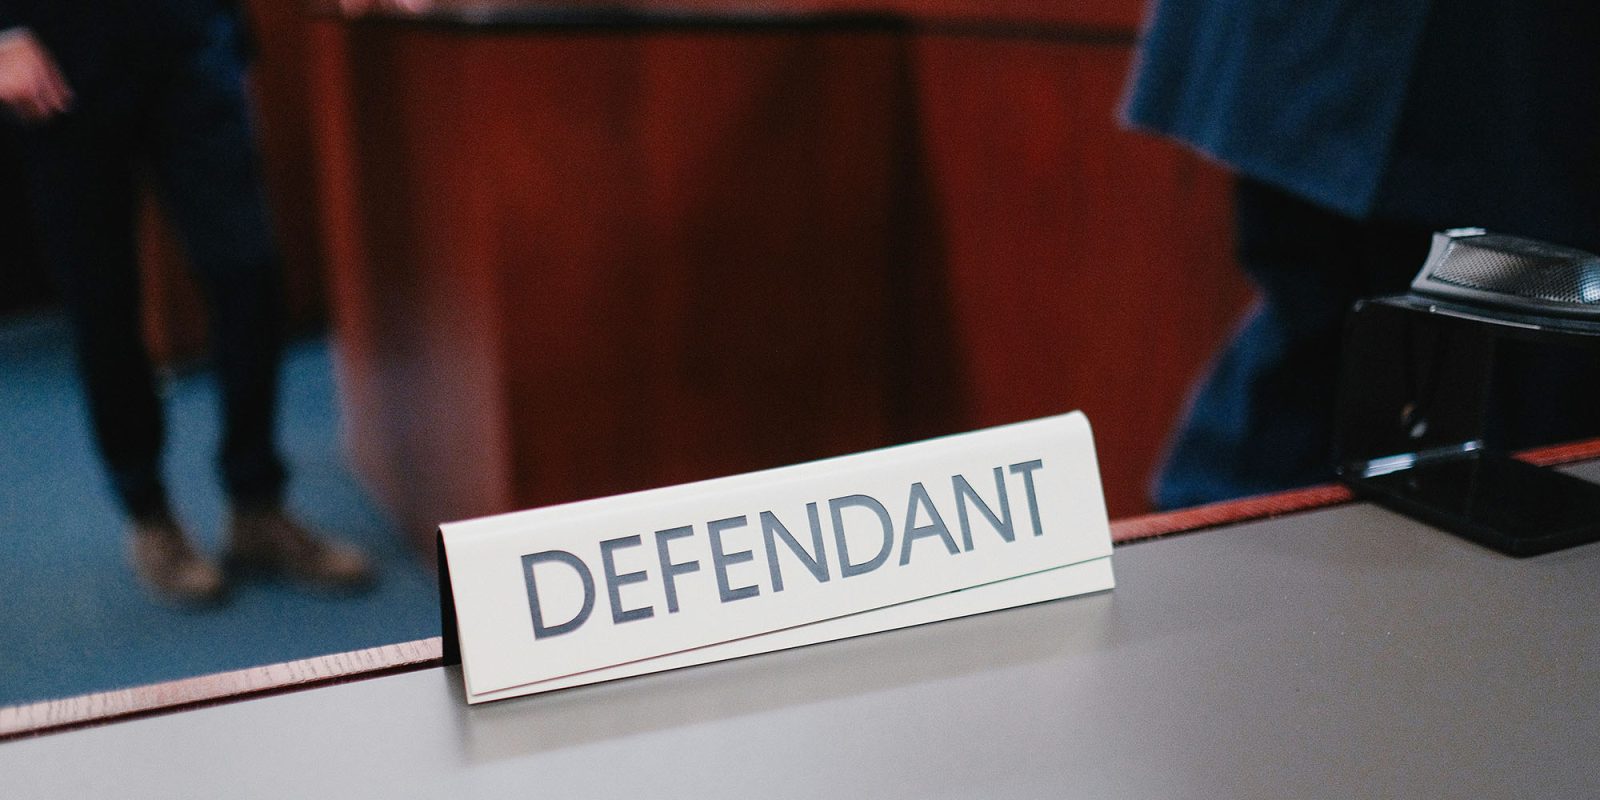 Apple looks set to lose latest court battle | Defendant sign in courtroom